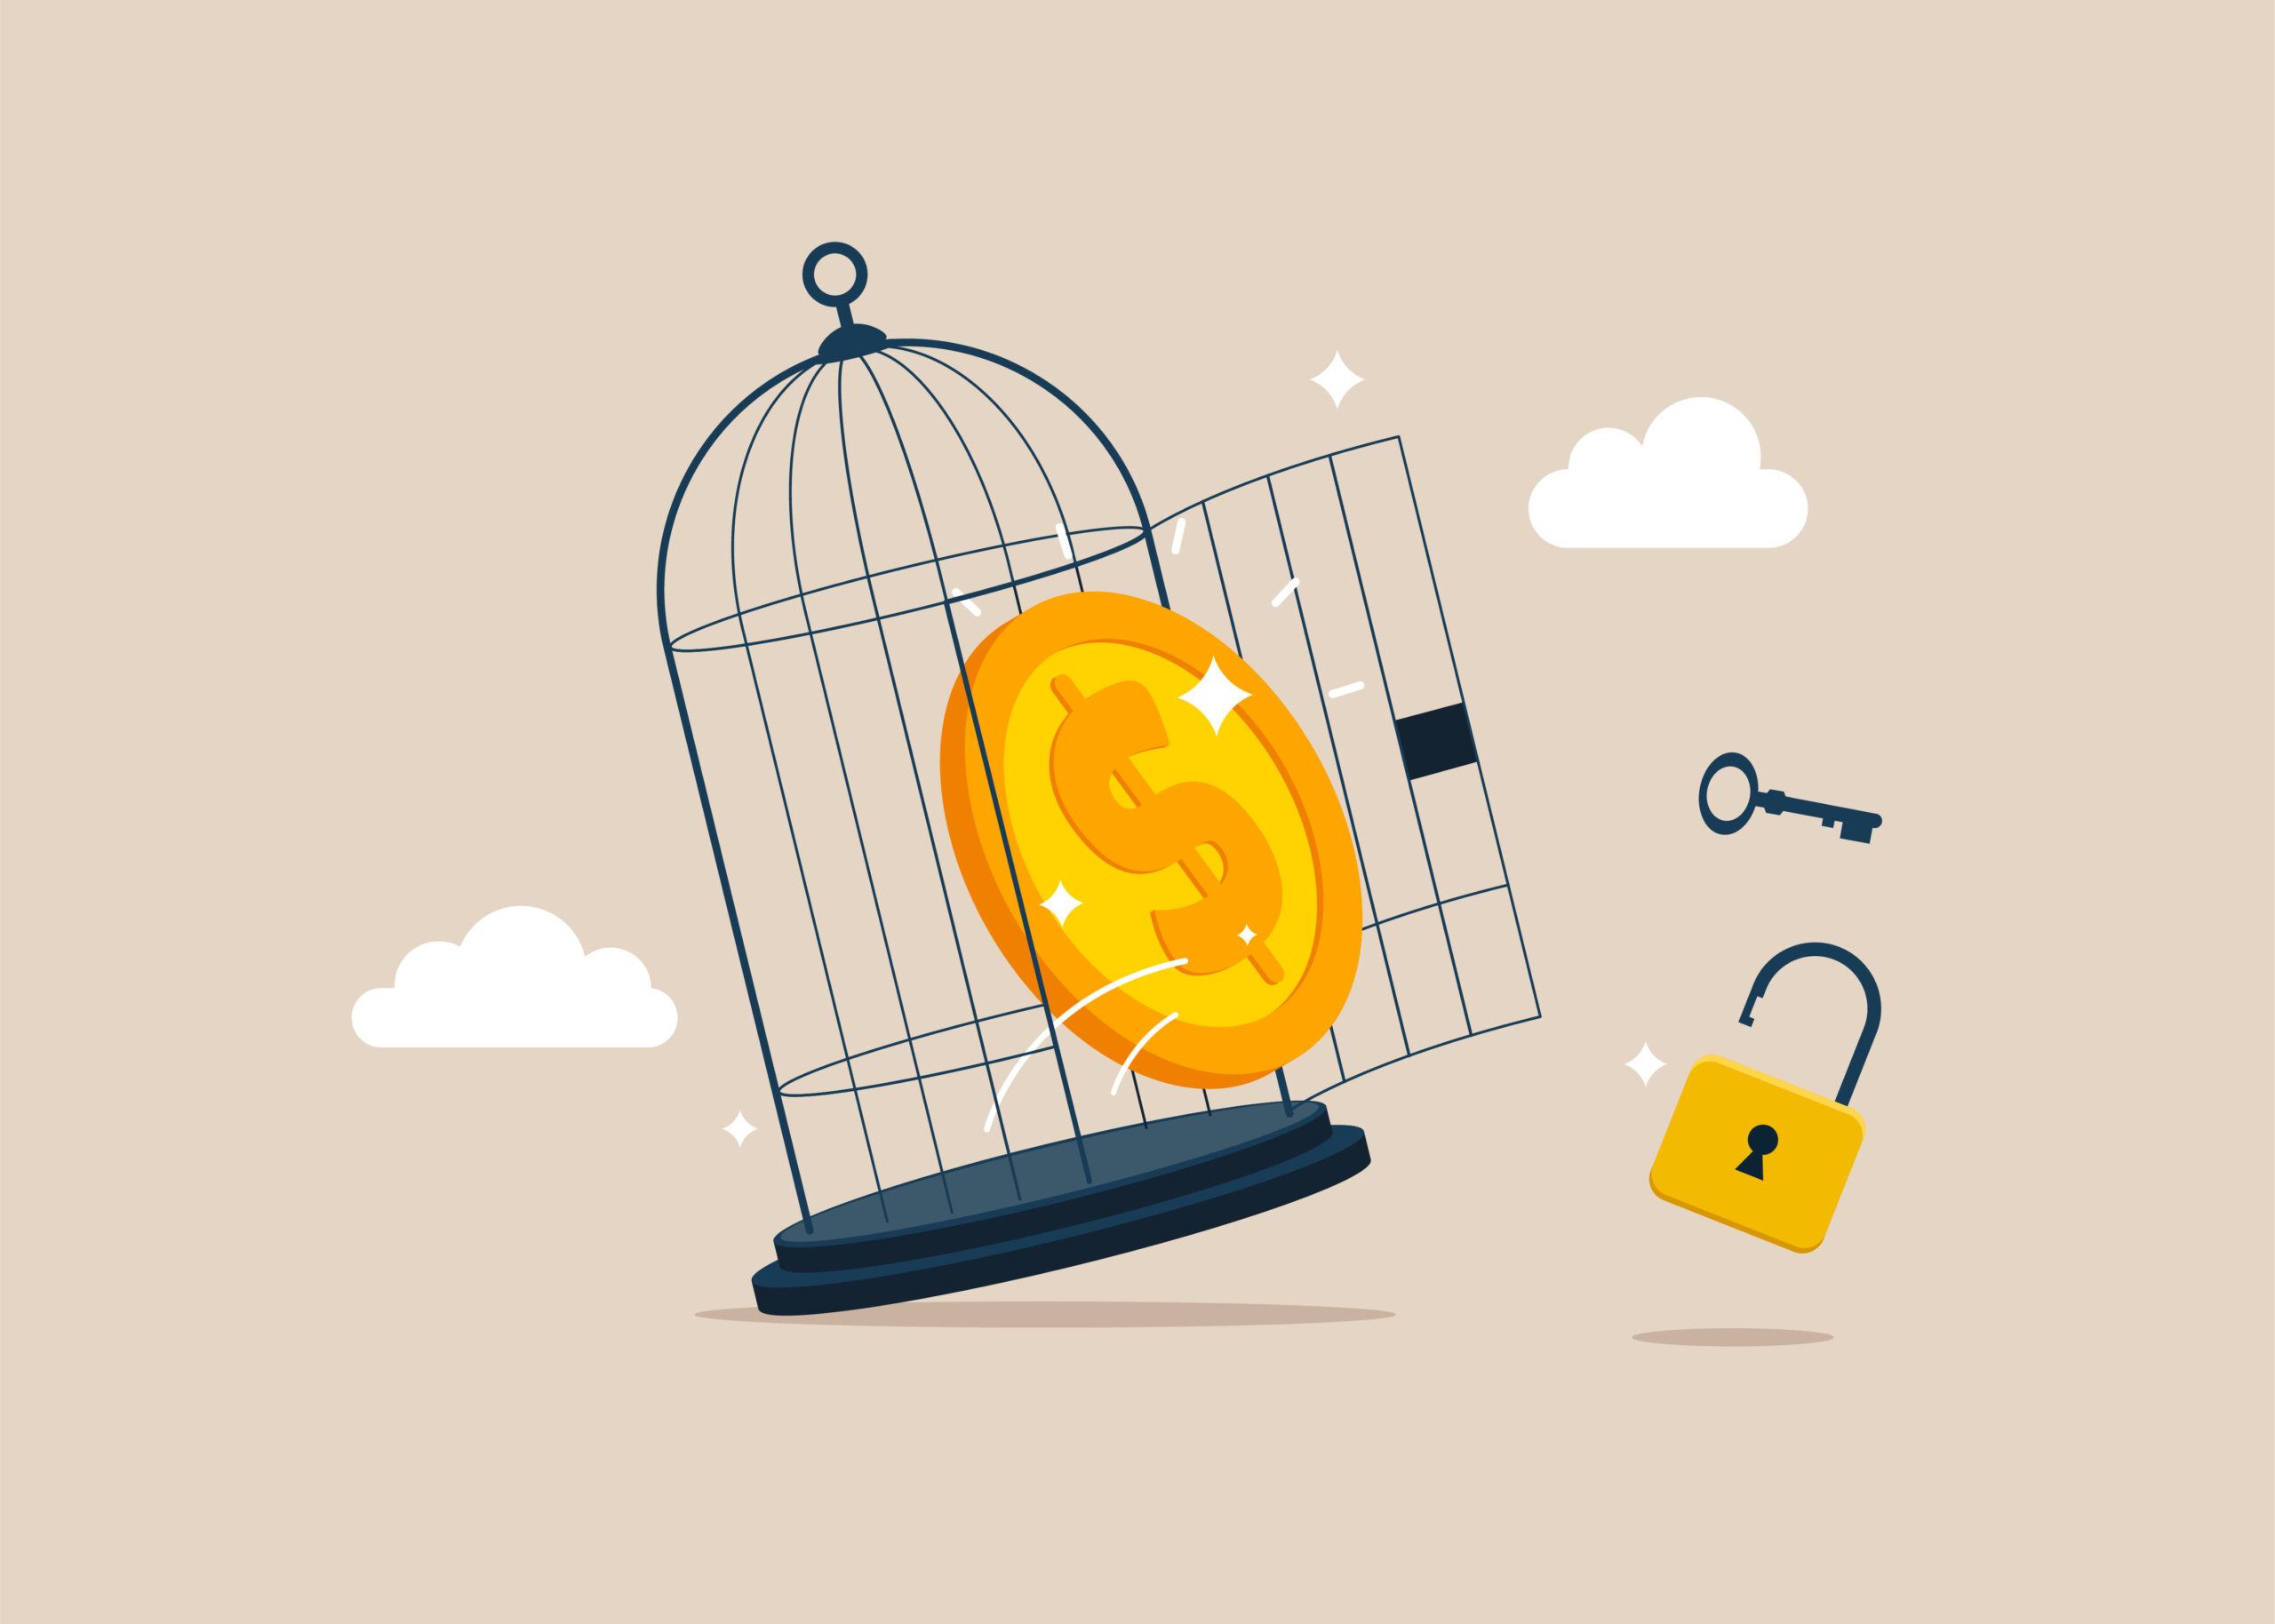 Dollar sign being freed from cage. [Get Your Donors to Stop Stressing About How the Money is Spent!]